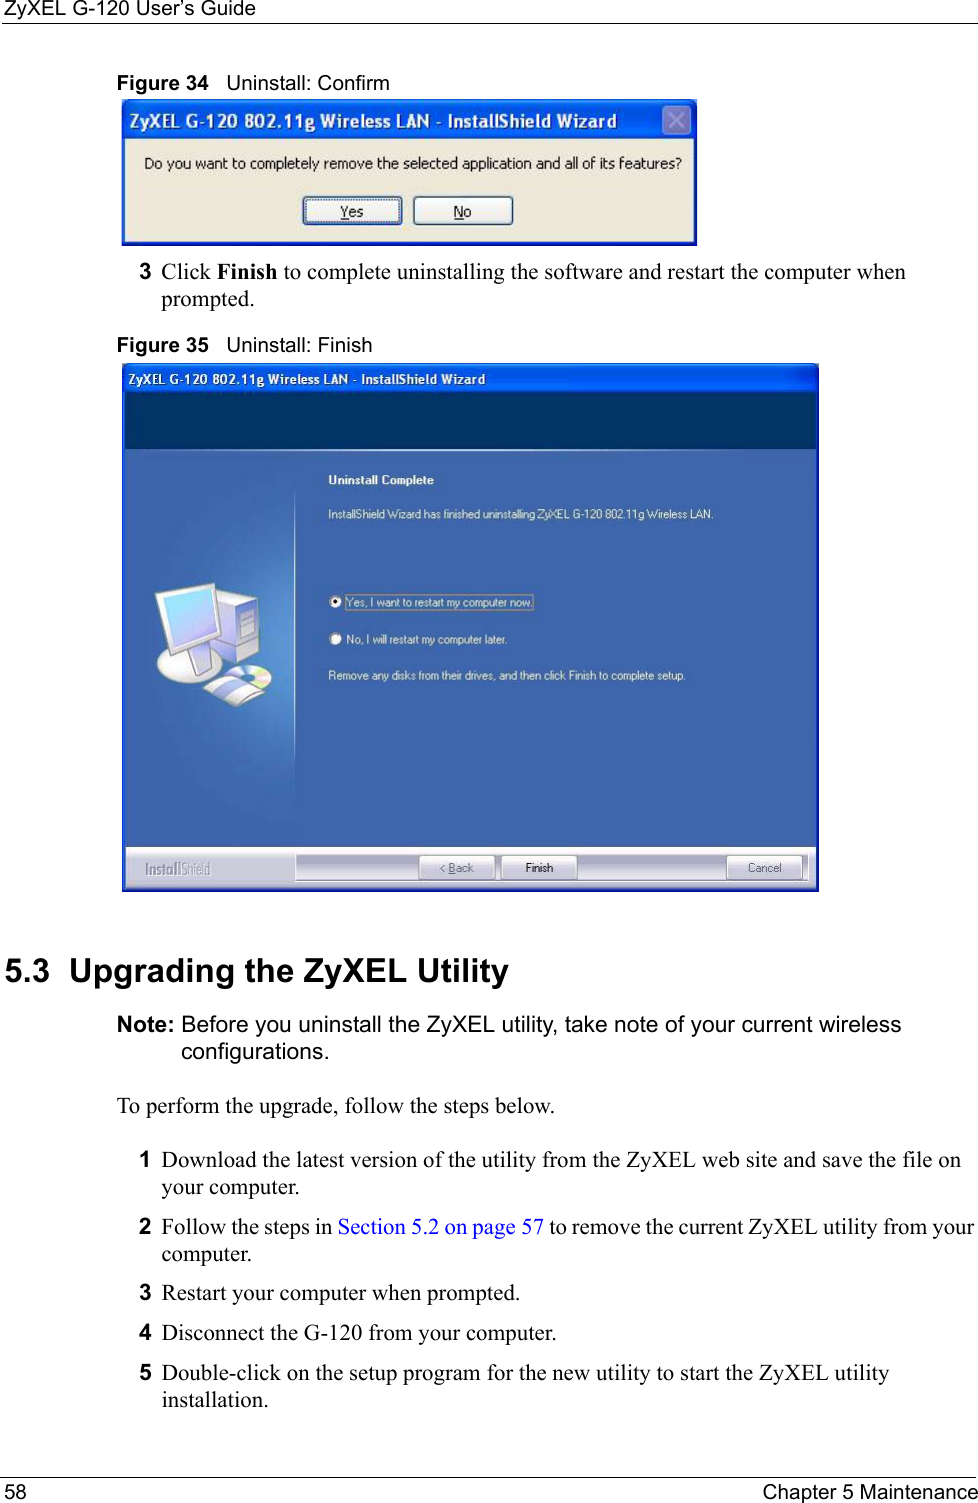 ZyXEL G-120 User’s Guide58 Chapter 5 MaintenanceFigure 34   Uninstall: Confirm  3Click Finish to complete uninstalling the software and restart the computer when prompted.Figure 35   Uninstall: Finish 5.3  Upgrading the ZyXEL Utility Note: Before you uninstall the ZyXEL utility, take note of your current wireless configurations.To perform the upgrade, follow the steps below.1Download the latest version of the utility from the ZyXEL web site and save the file on your computer.2Follow the steps in Section 5.2 on page 57 to remove the current ZyXEL utility from your computer.3Restart your computer when prompted.4Disconnect the G-120 from your computer.5Double-click on the setup program for the new utility to start the ZyXEL utility installation.